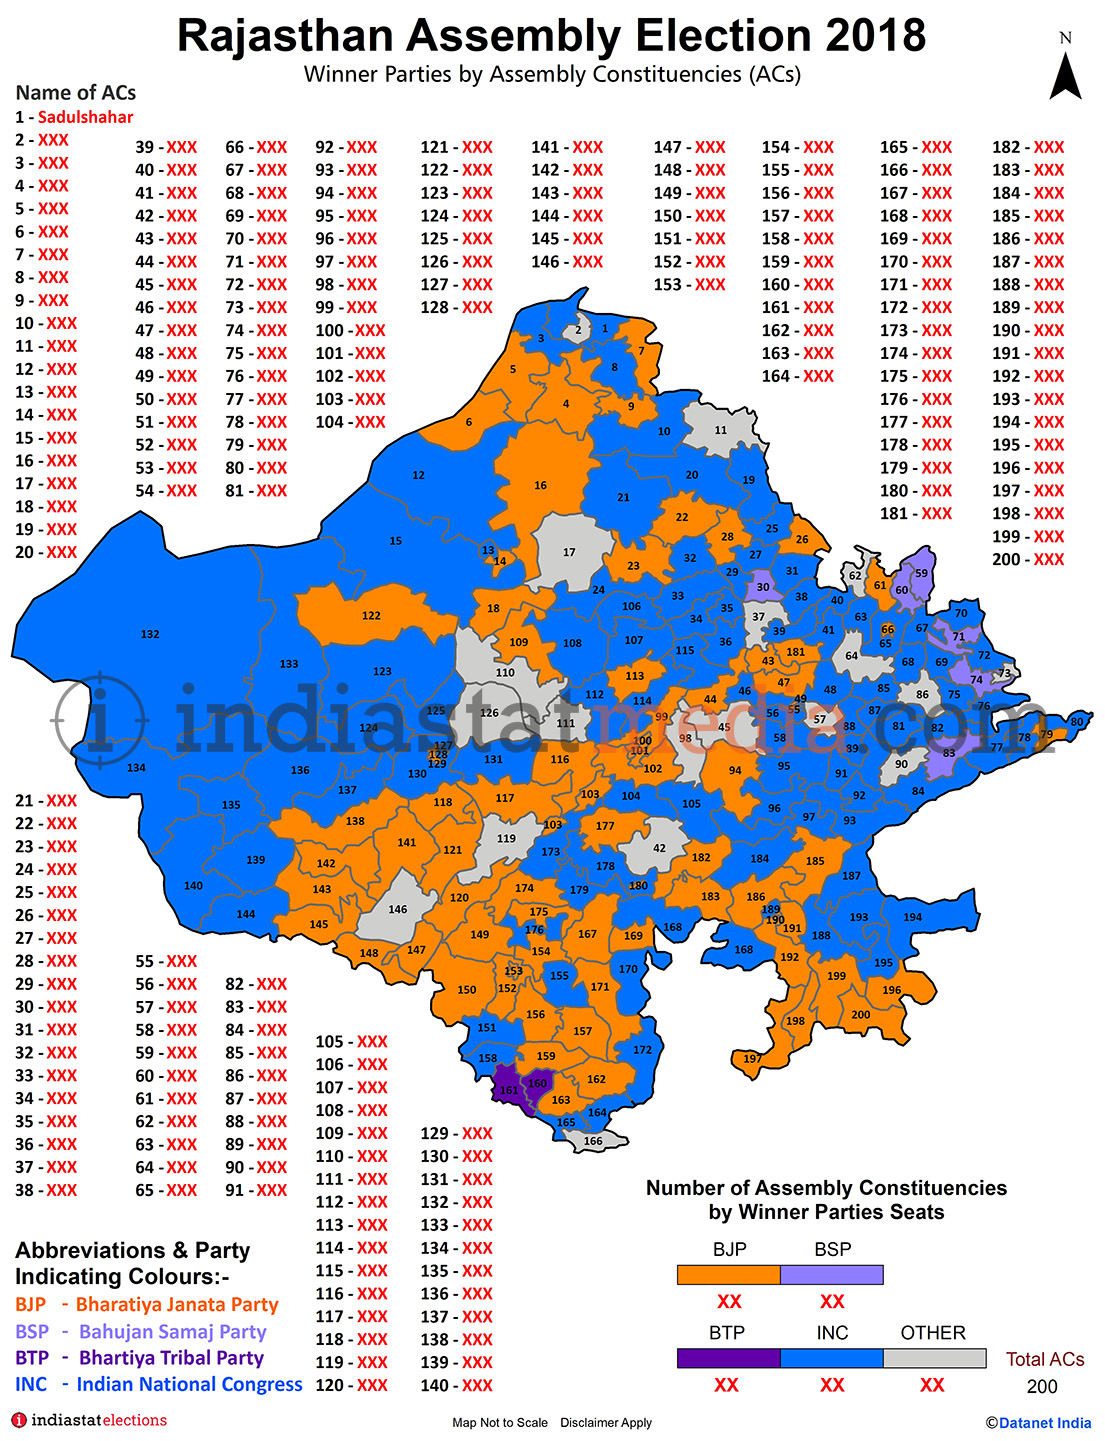 Winner Parties by Assembly Constituencies in Rajasthan (Assembly Election - 2018)